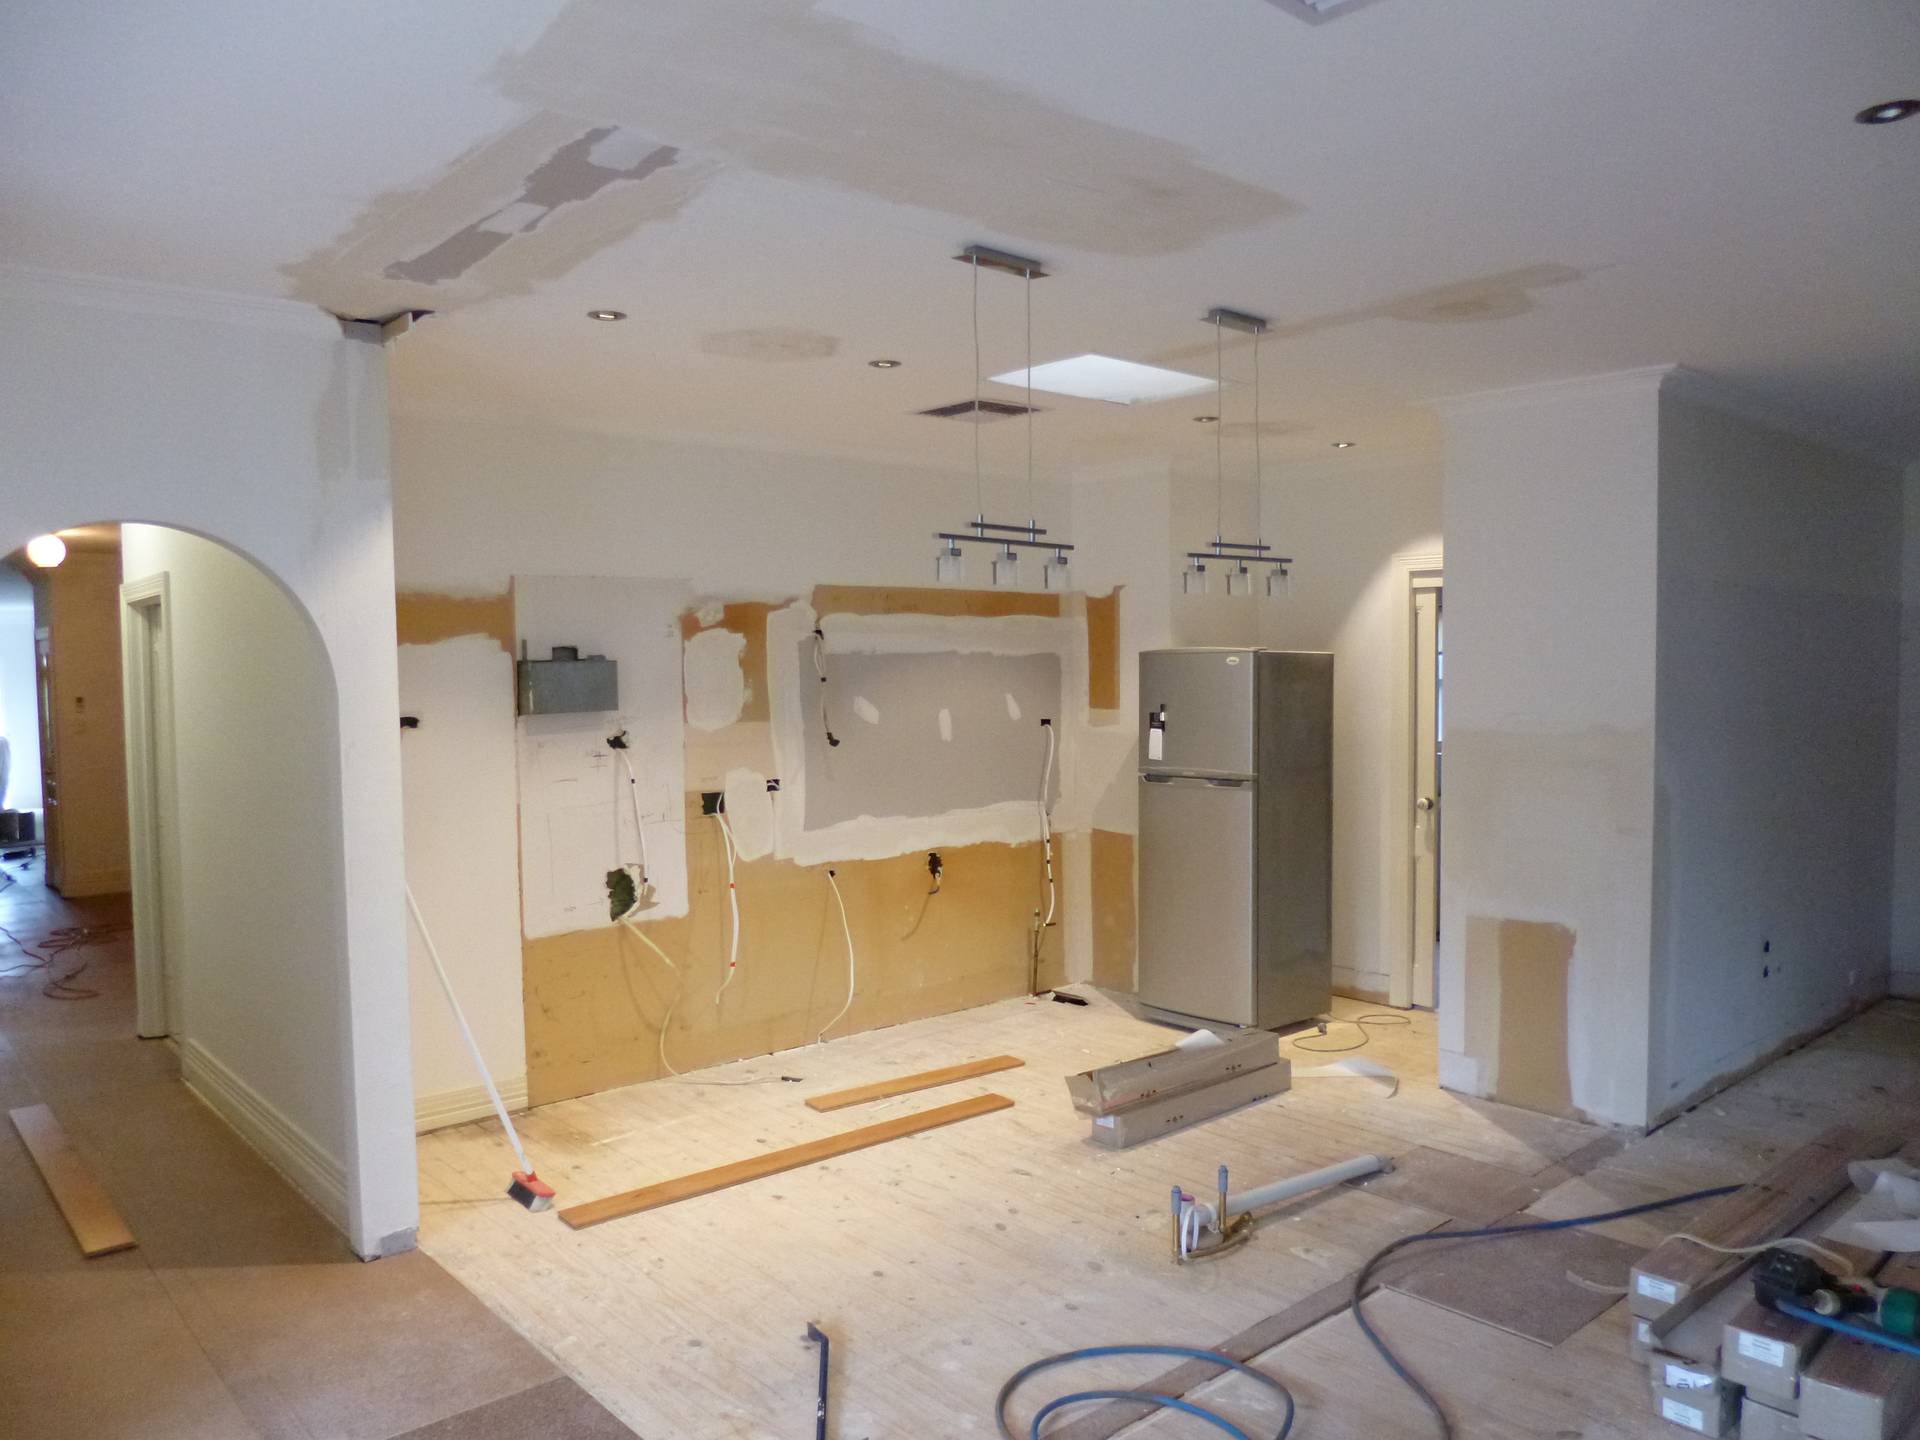 Existing kitchen has been demolished, all electrical wiring and plumbing installed for the new cabinet layout and plaster has been patched ready for the new kitchen.